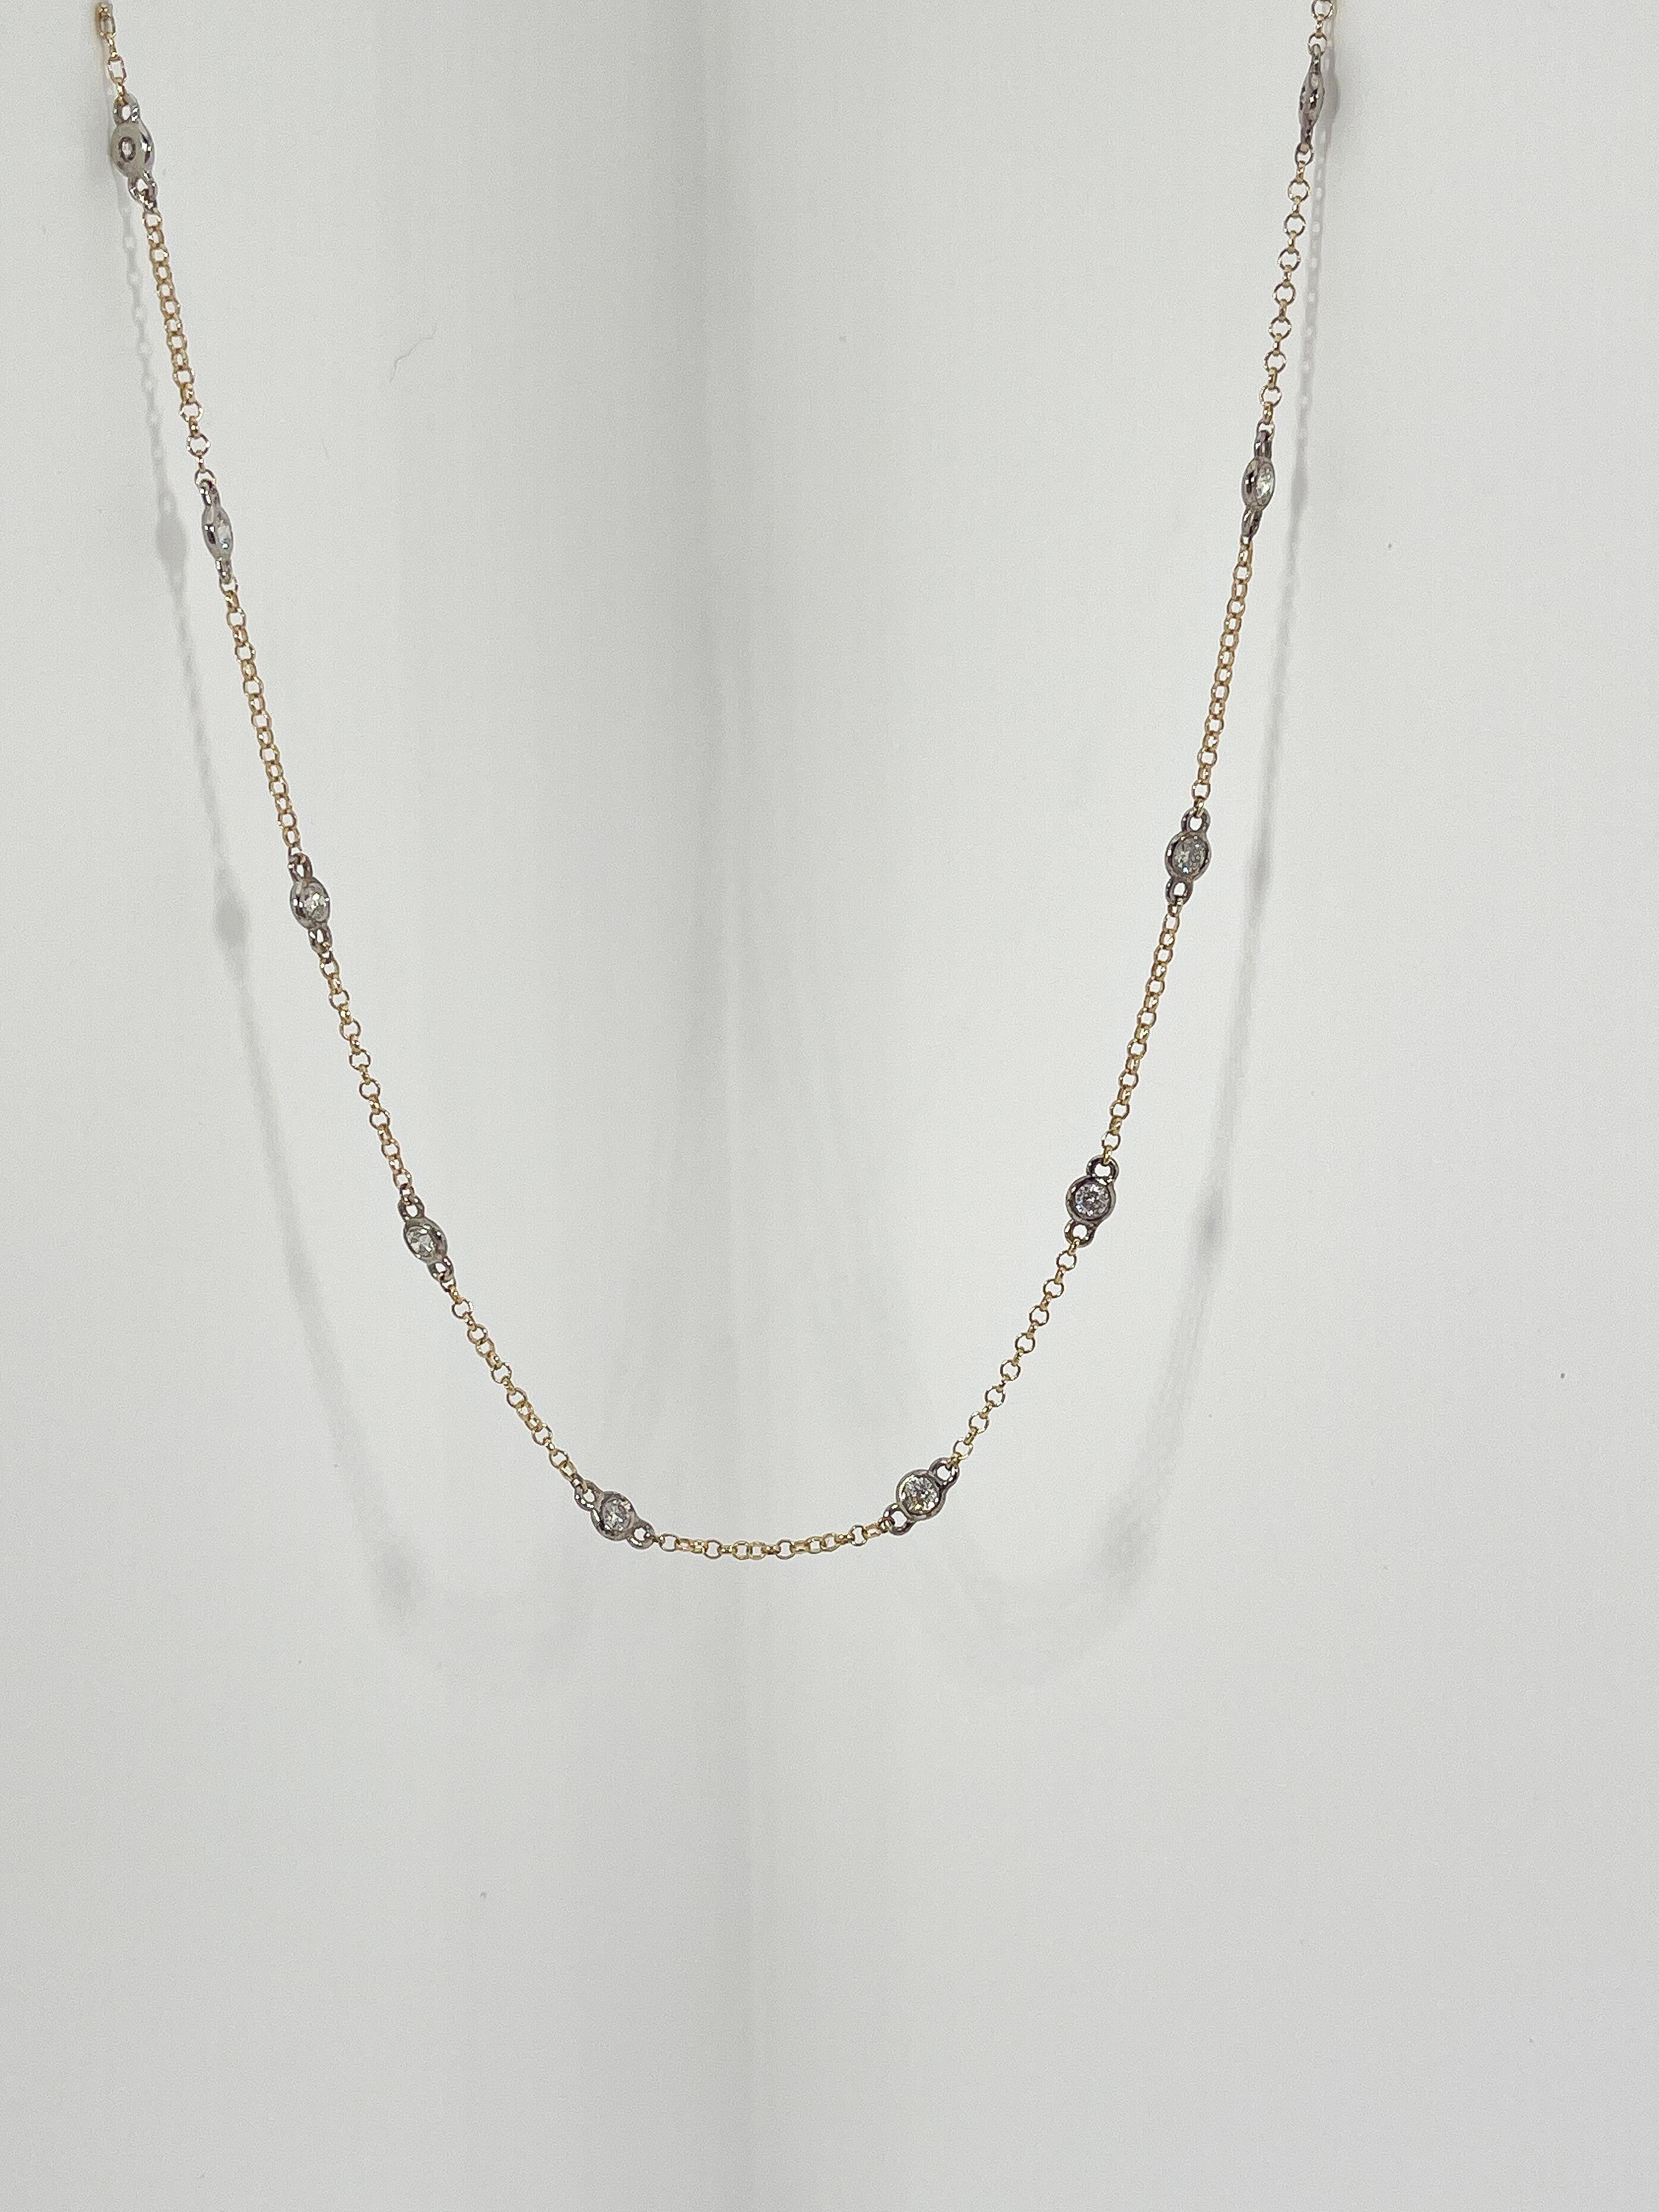 Round Cut 14K Two Toned Diamonds By The Yard Necklace .75 CTW For Sale